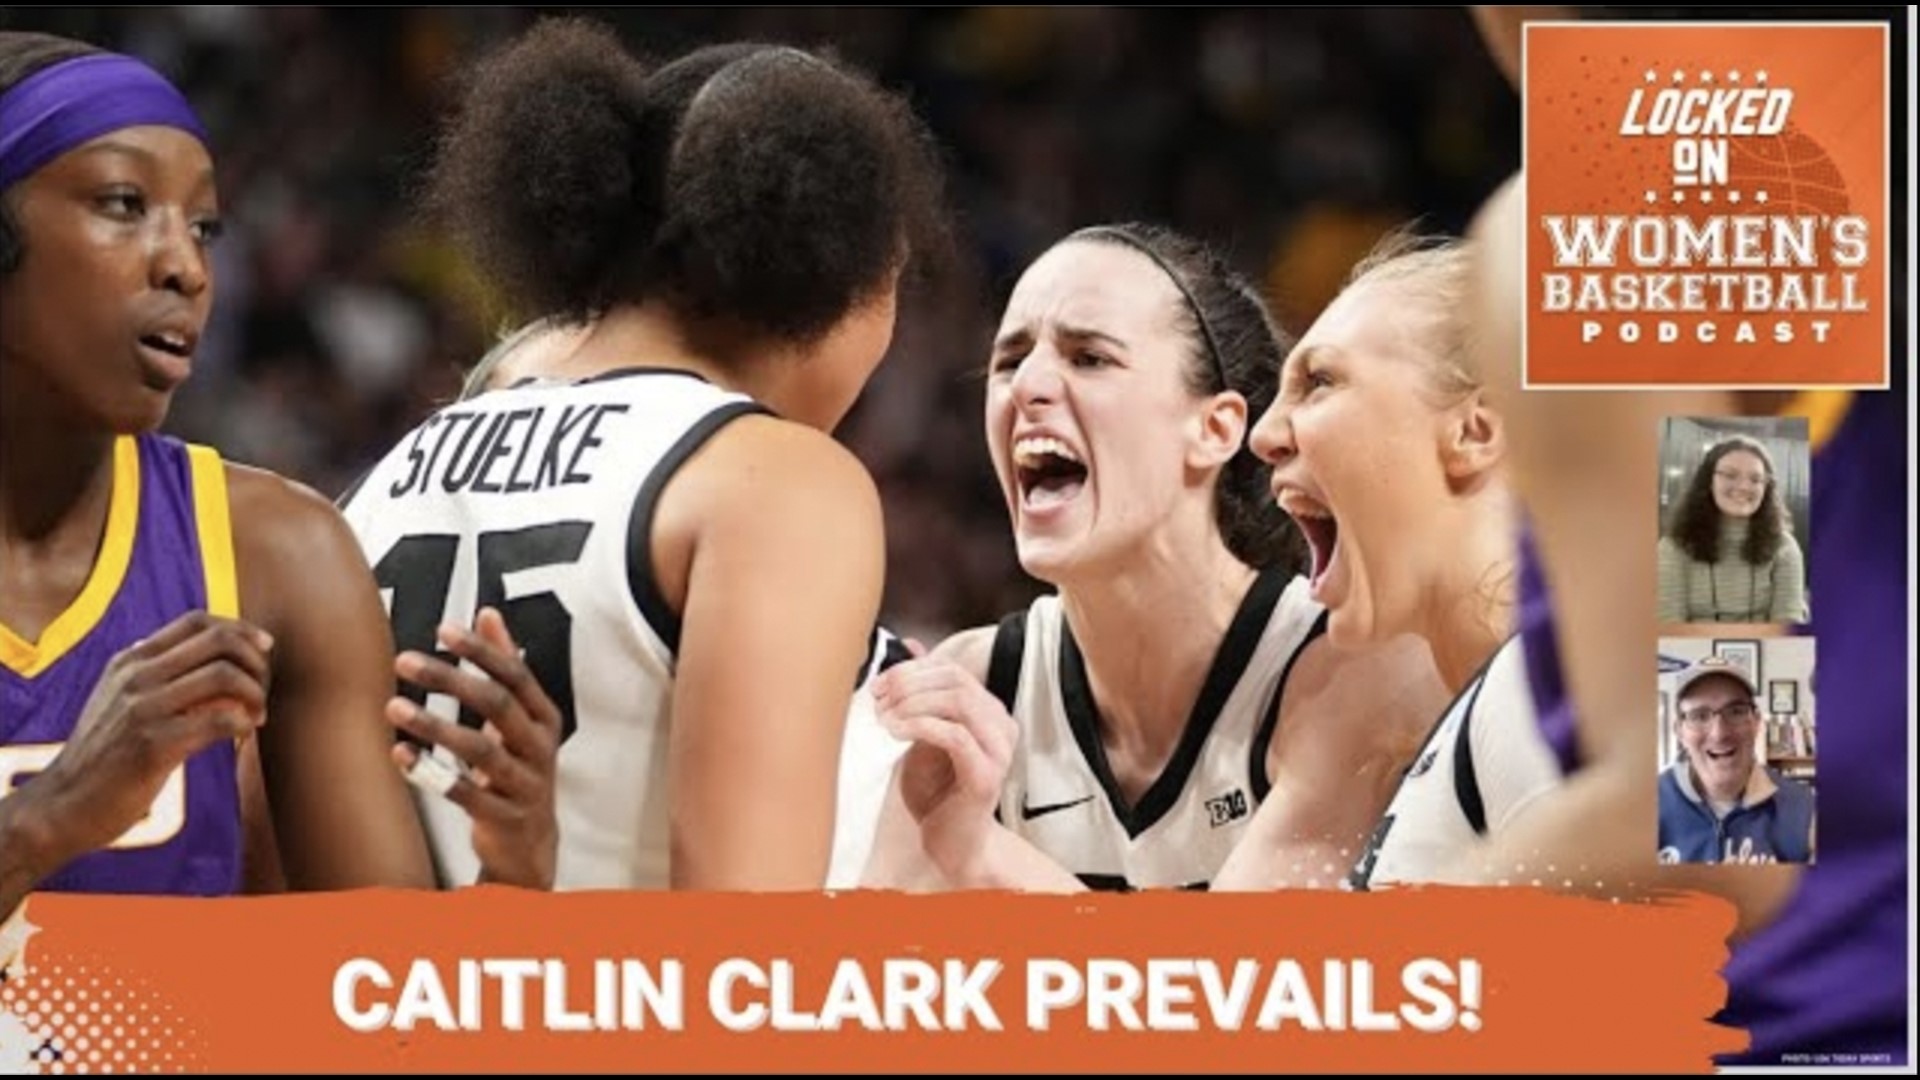 It was billed as a game for the ages and it was precisely that. Caitlin Clark scored 41 points and dished out 12 assists in Iowa's 94-87 win over Angel Reese and LSU